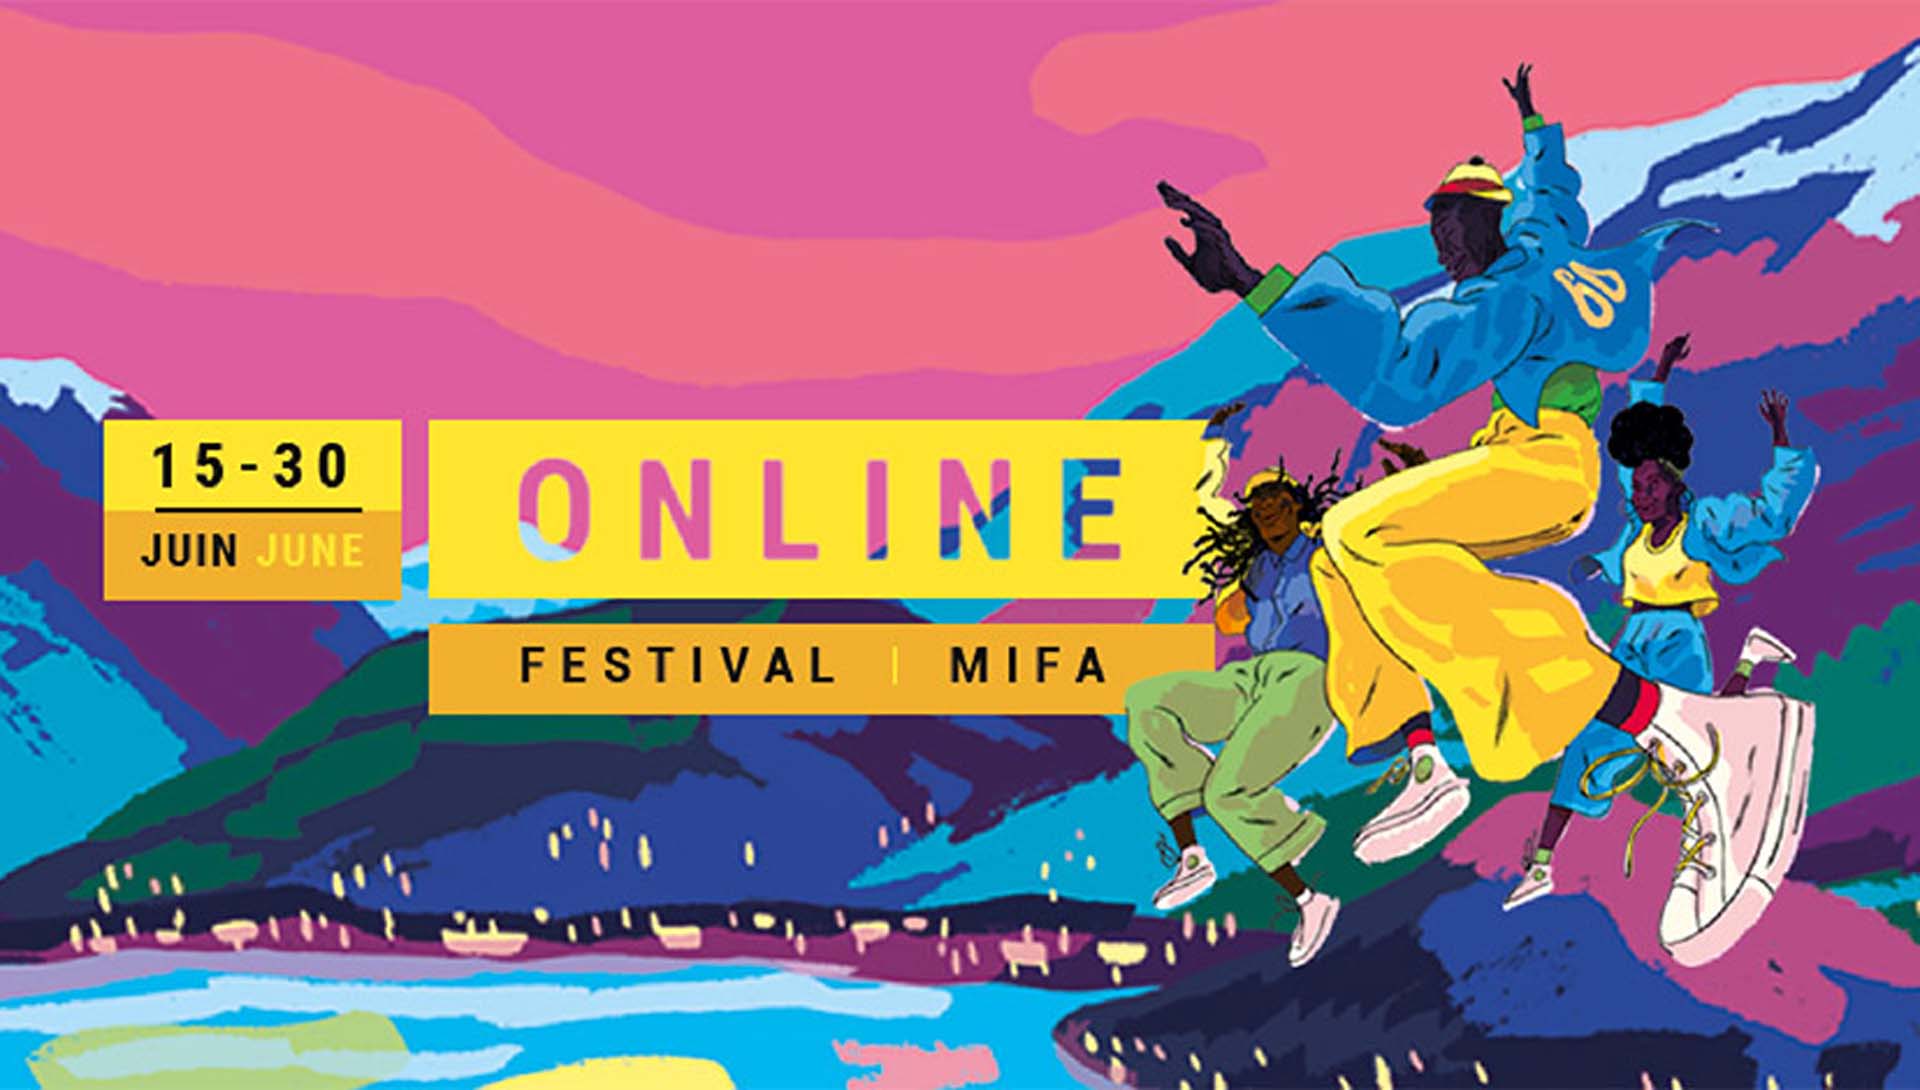 Affiche festival d'Annecy on line